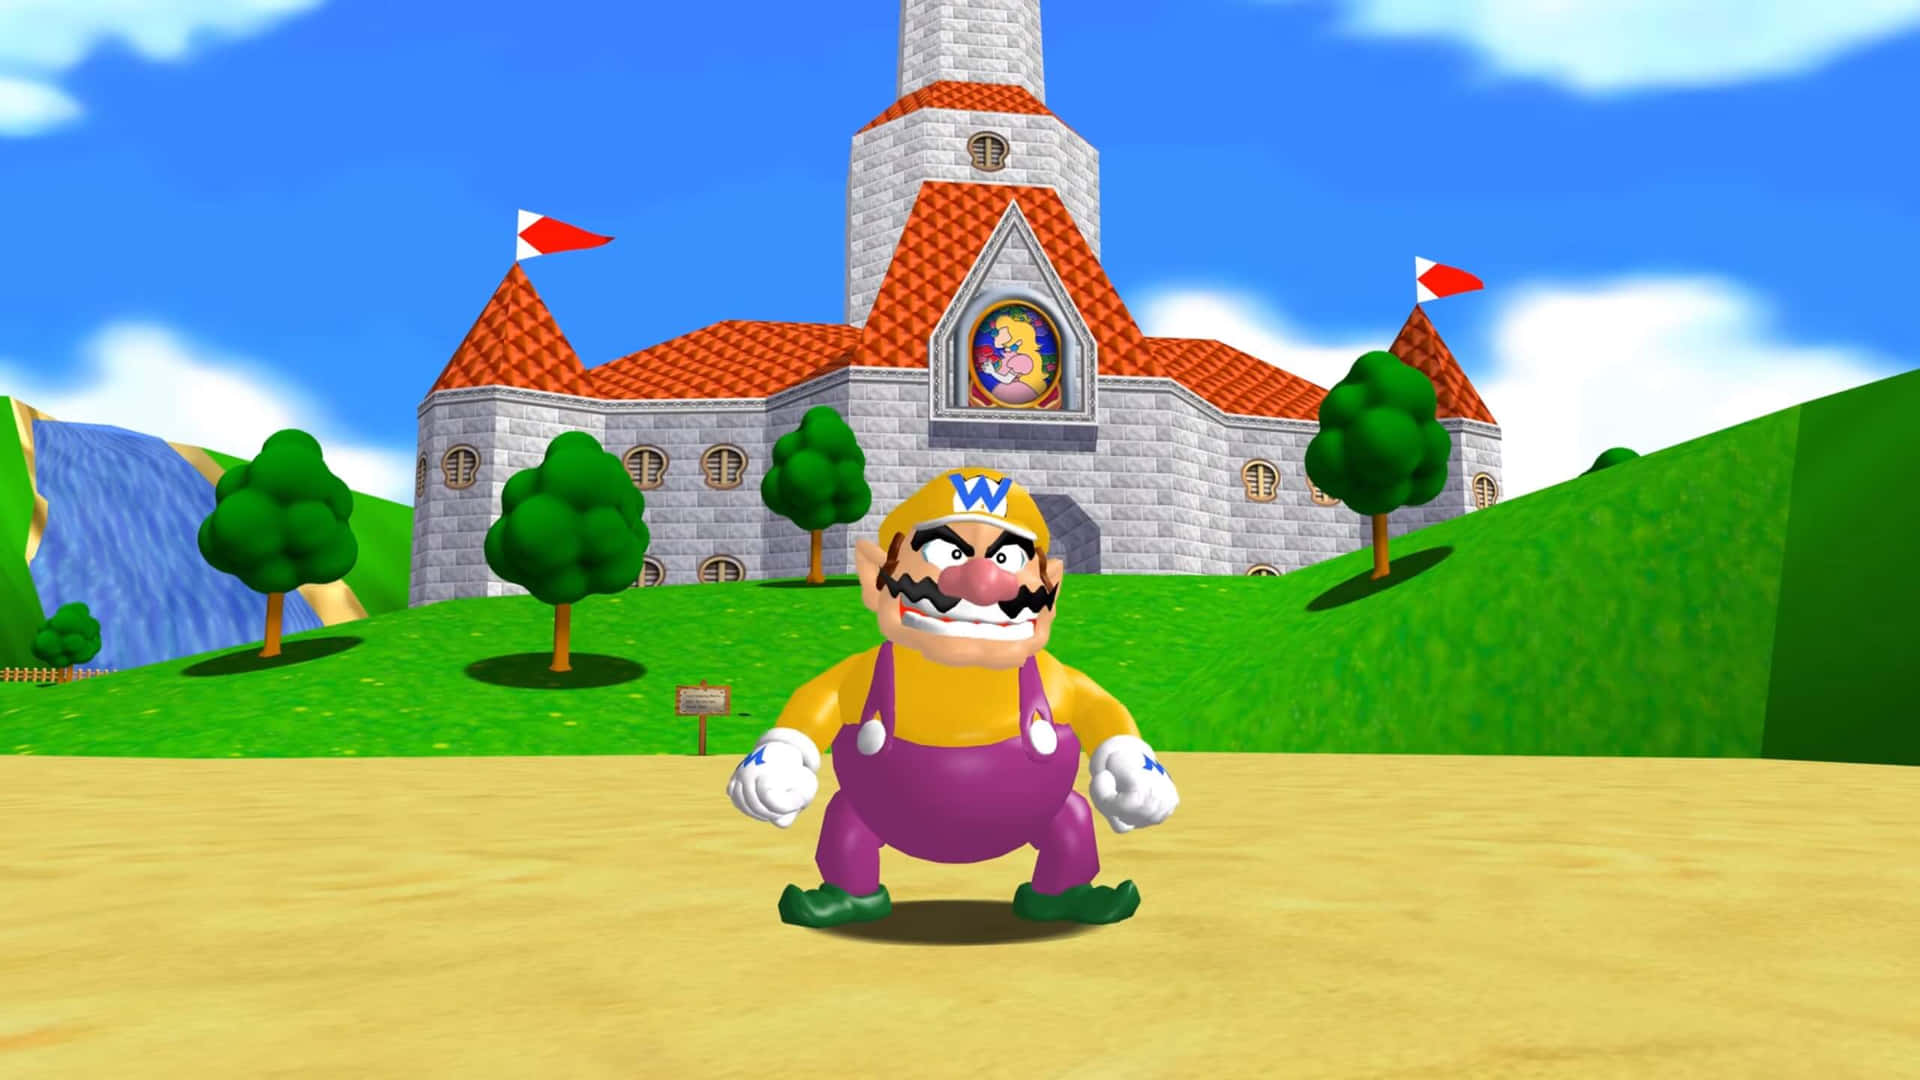 Wario In His Classic Outfit, Smirking Against A Colorful Abstract Background